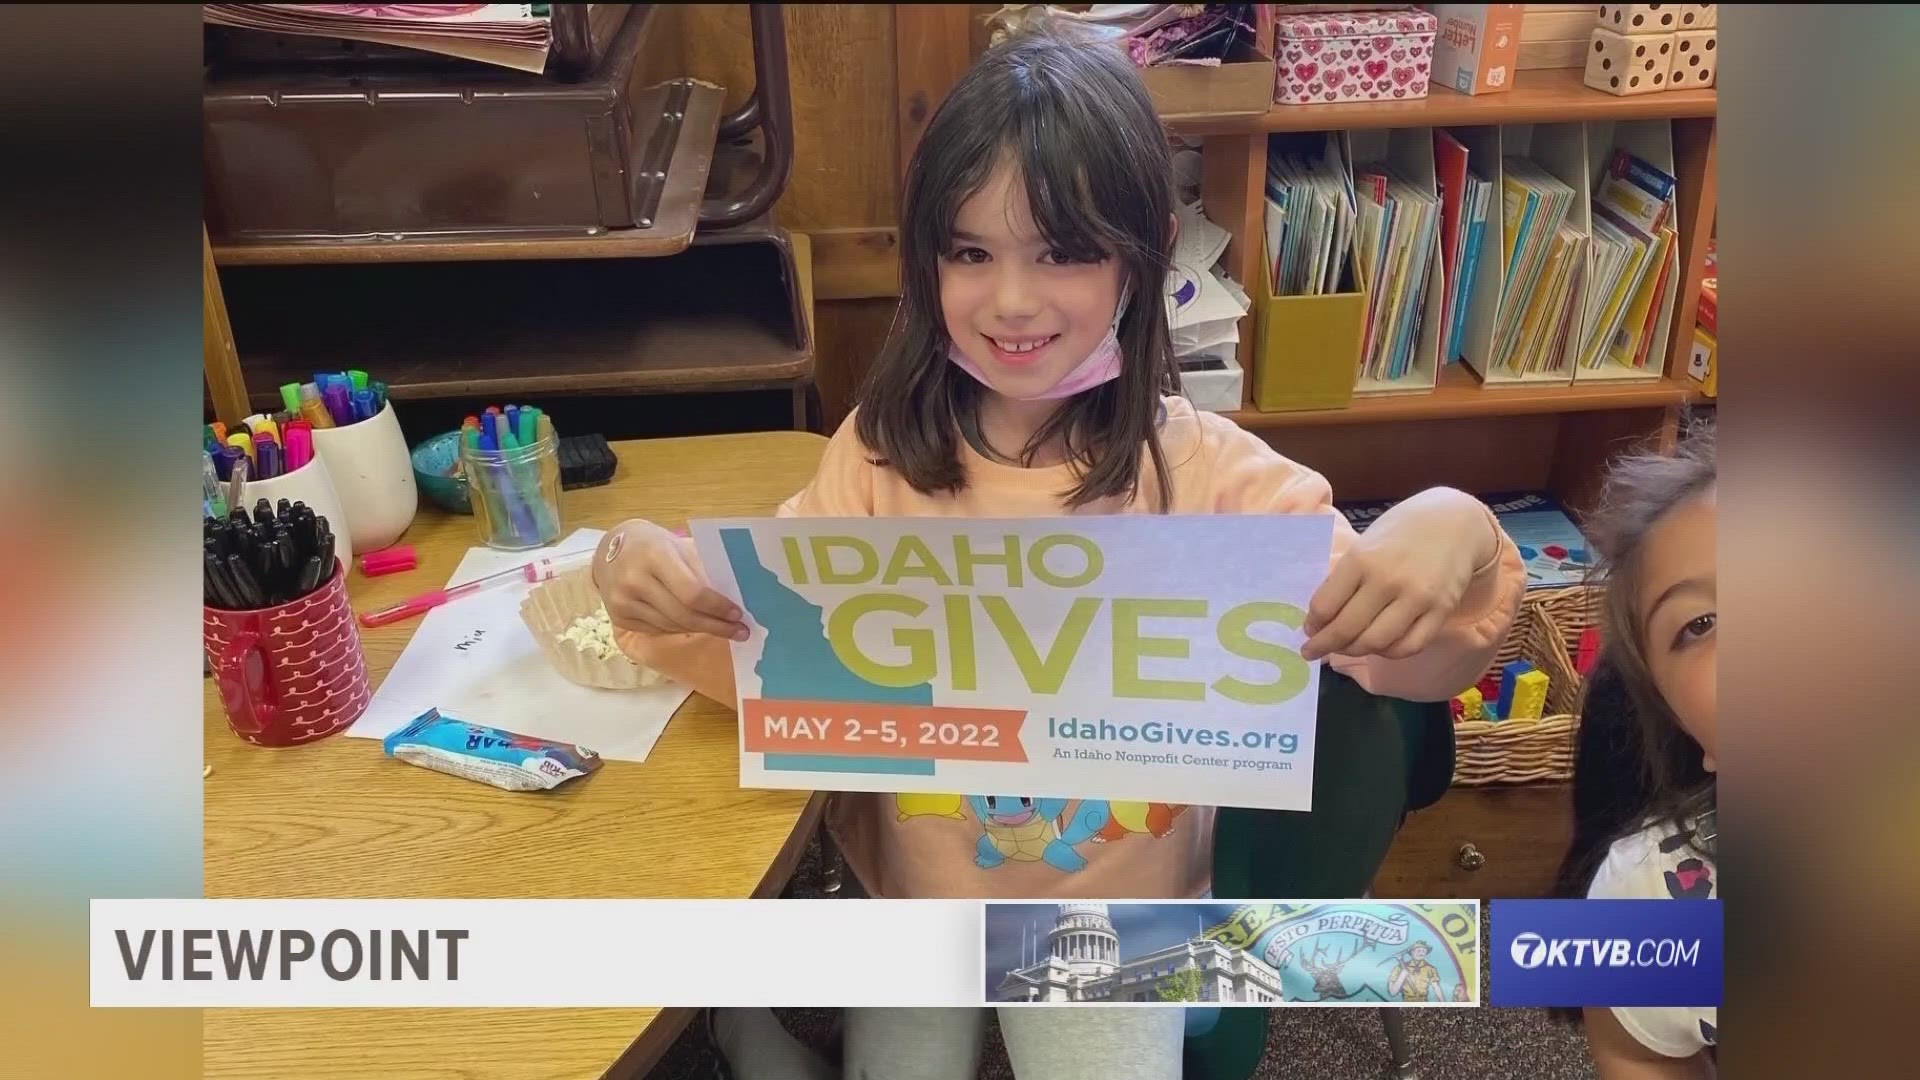 Over its first 10 years Idaho's largest online giving event has raised just under $20 million for Idaho nonprofits.